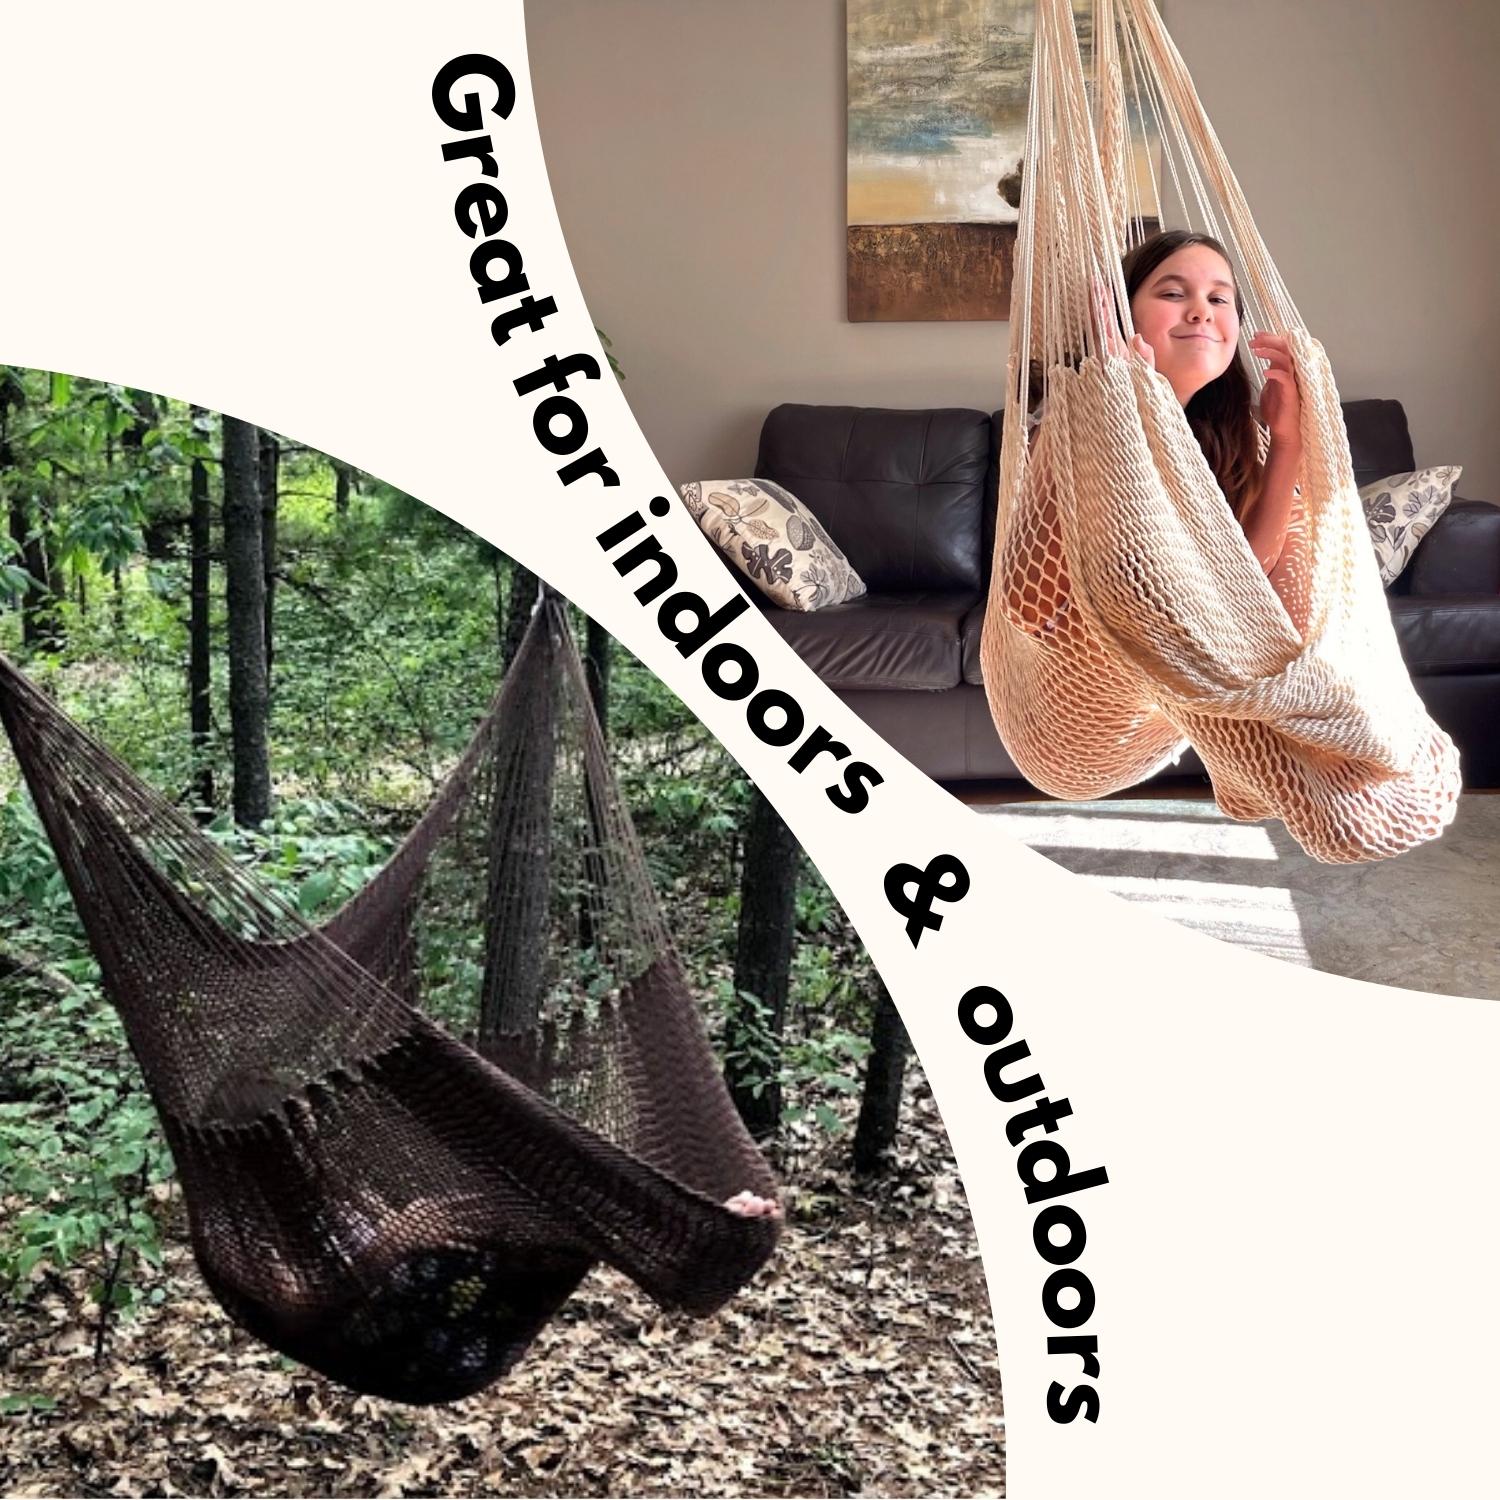 Hammock swing is great for indoors and outdoors. There are two hammocks on the image. There is a girl in a cream hammock in a living room and someone is using a hammock swing while camping.